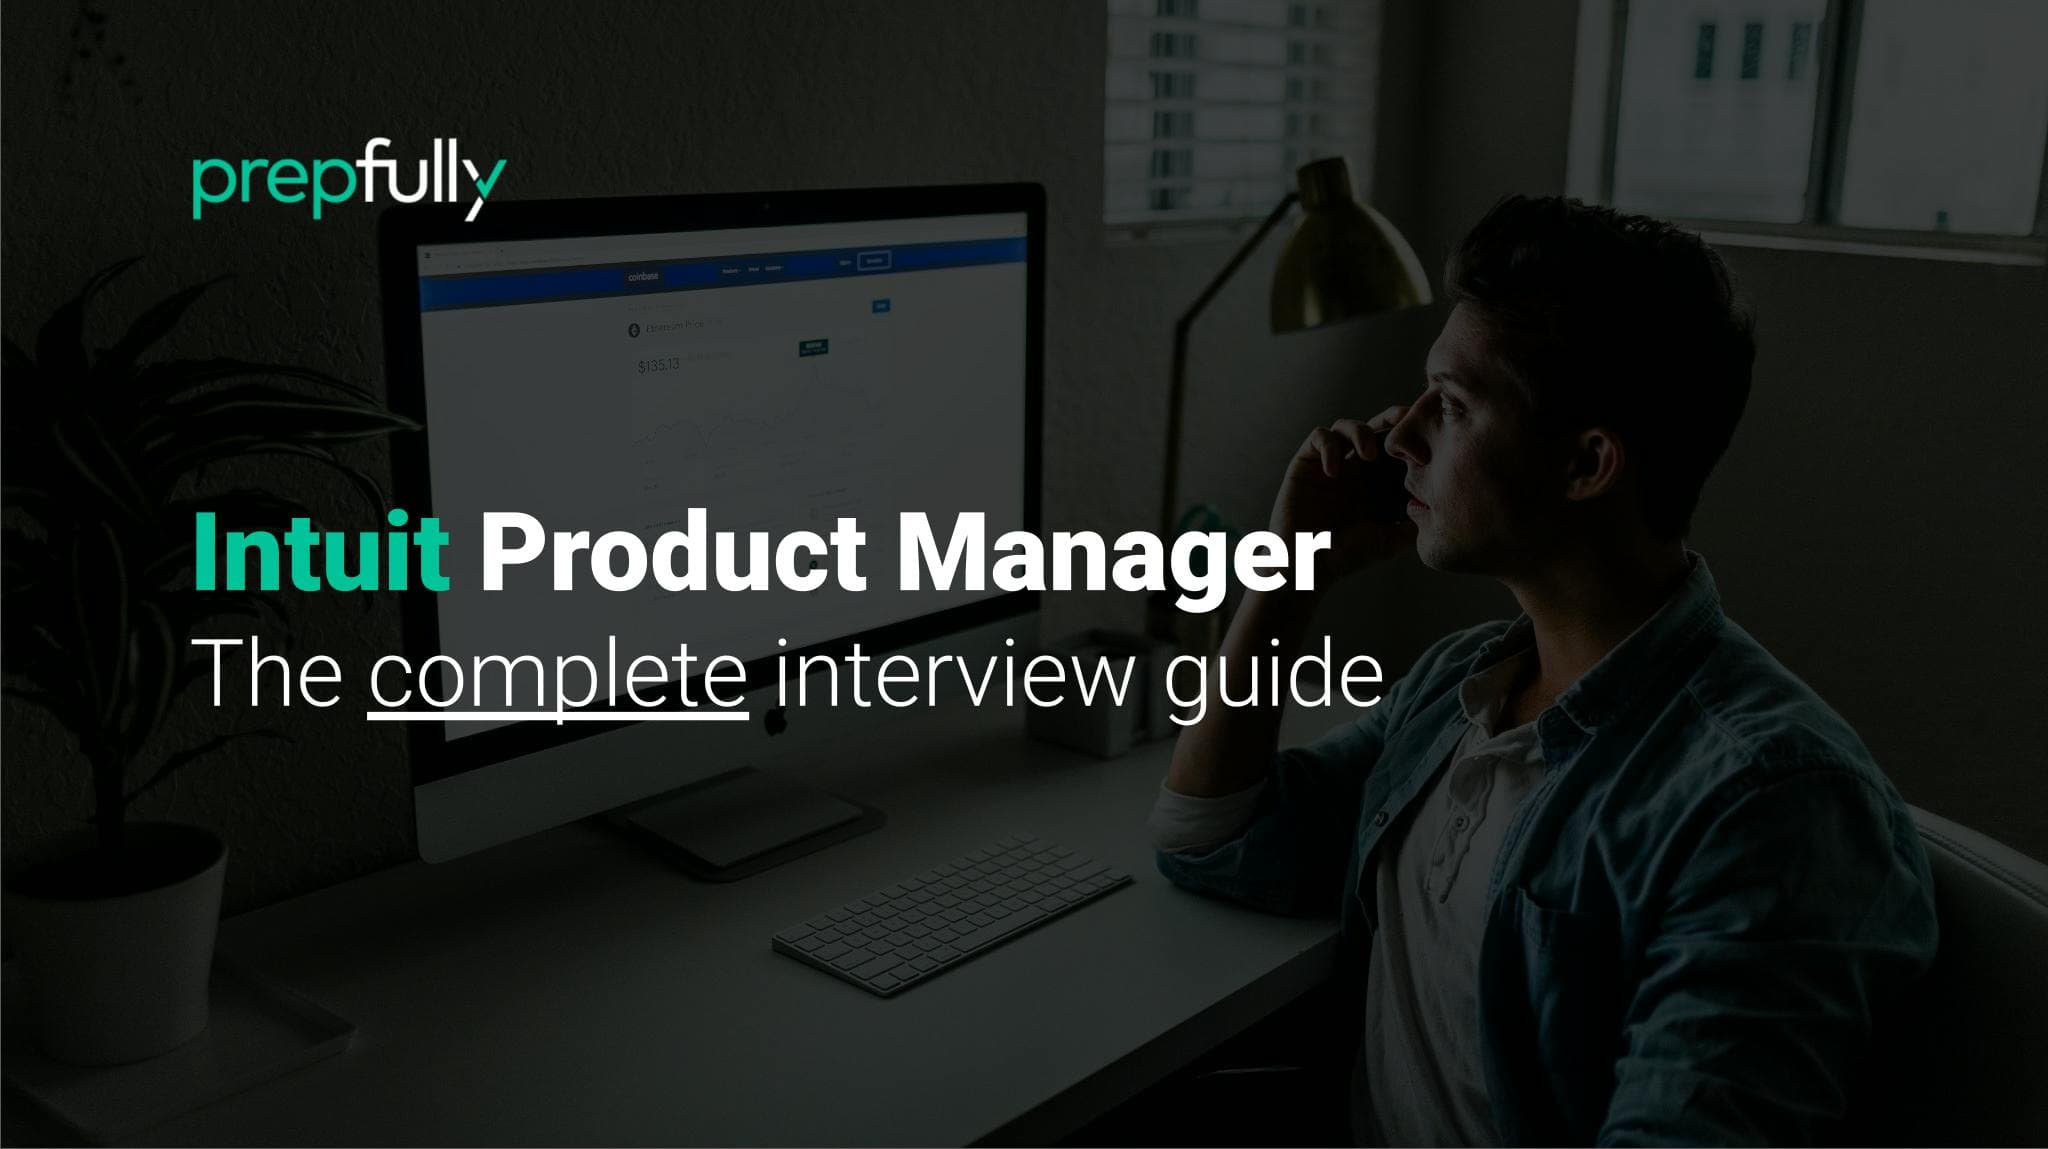 Interview guide for Intuit Product Manager